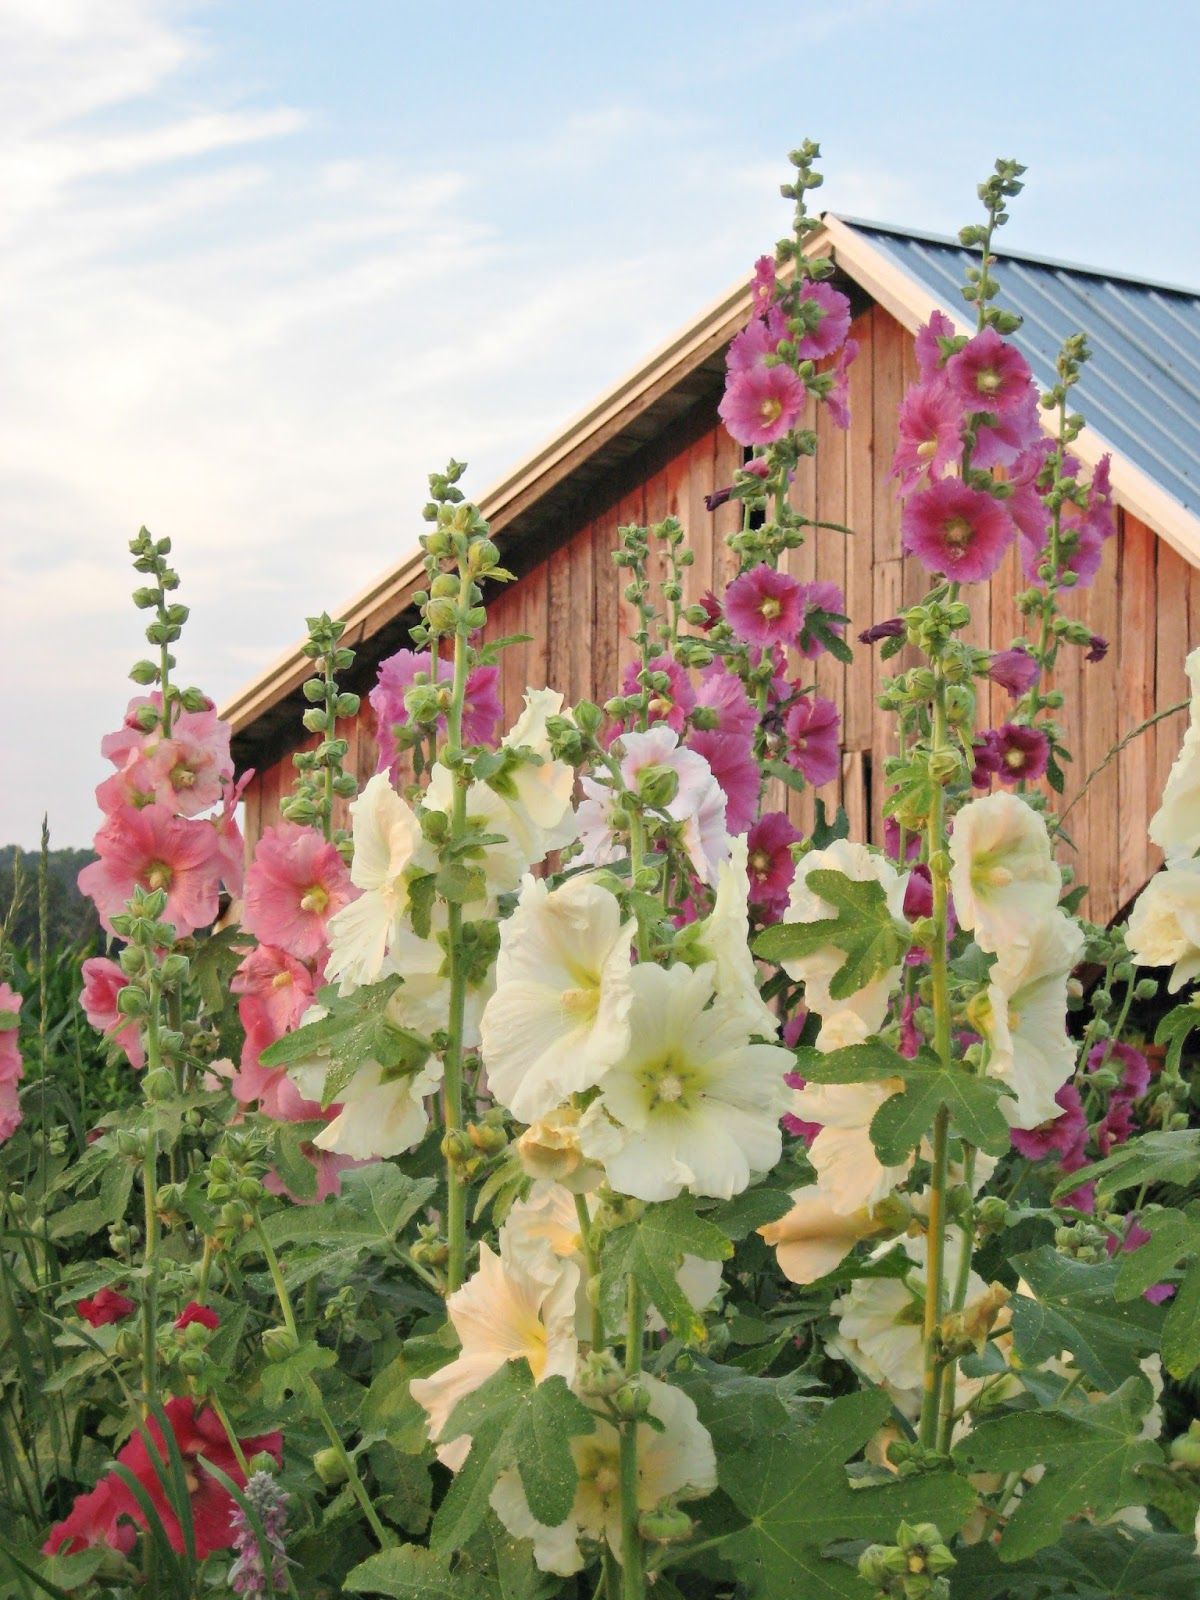 Love hollyhocks (1) From: Robin Happy At Home, please visit